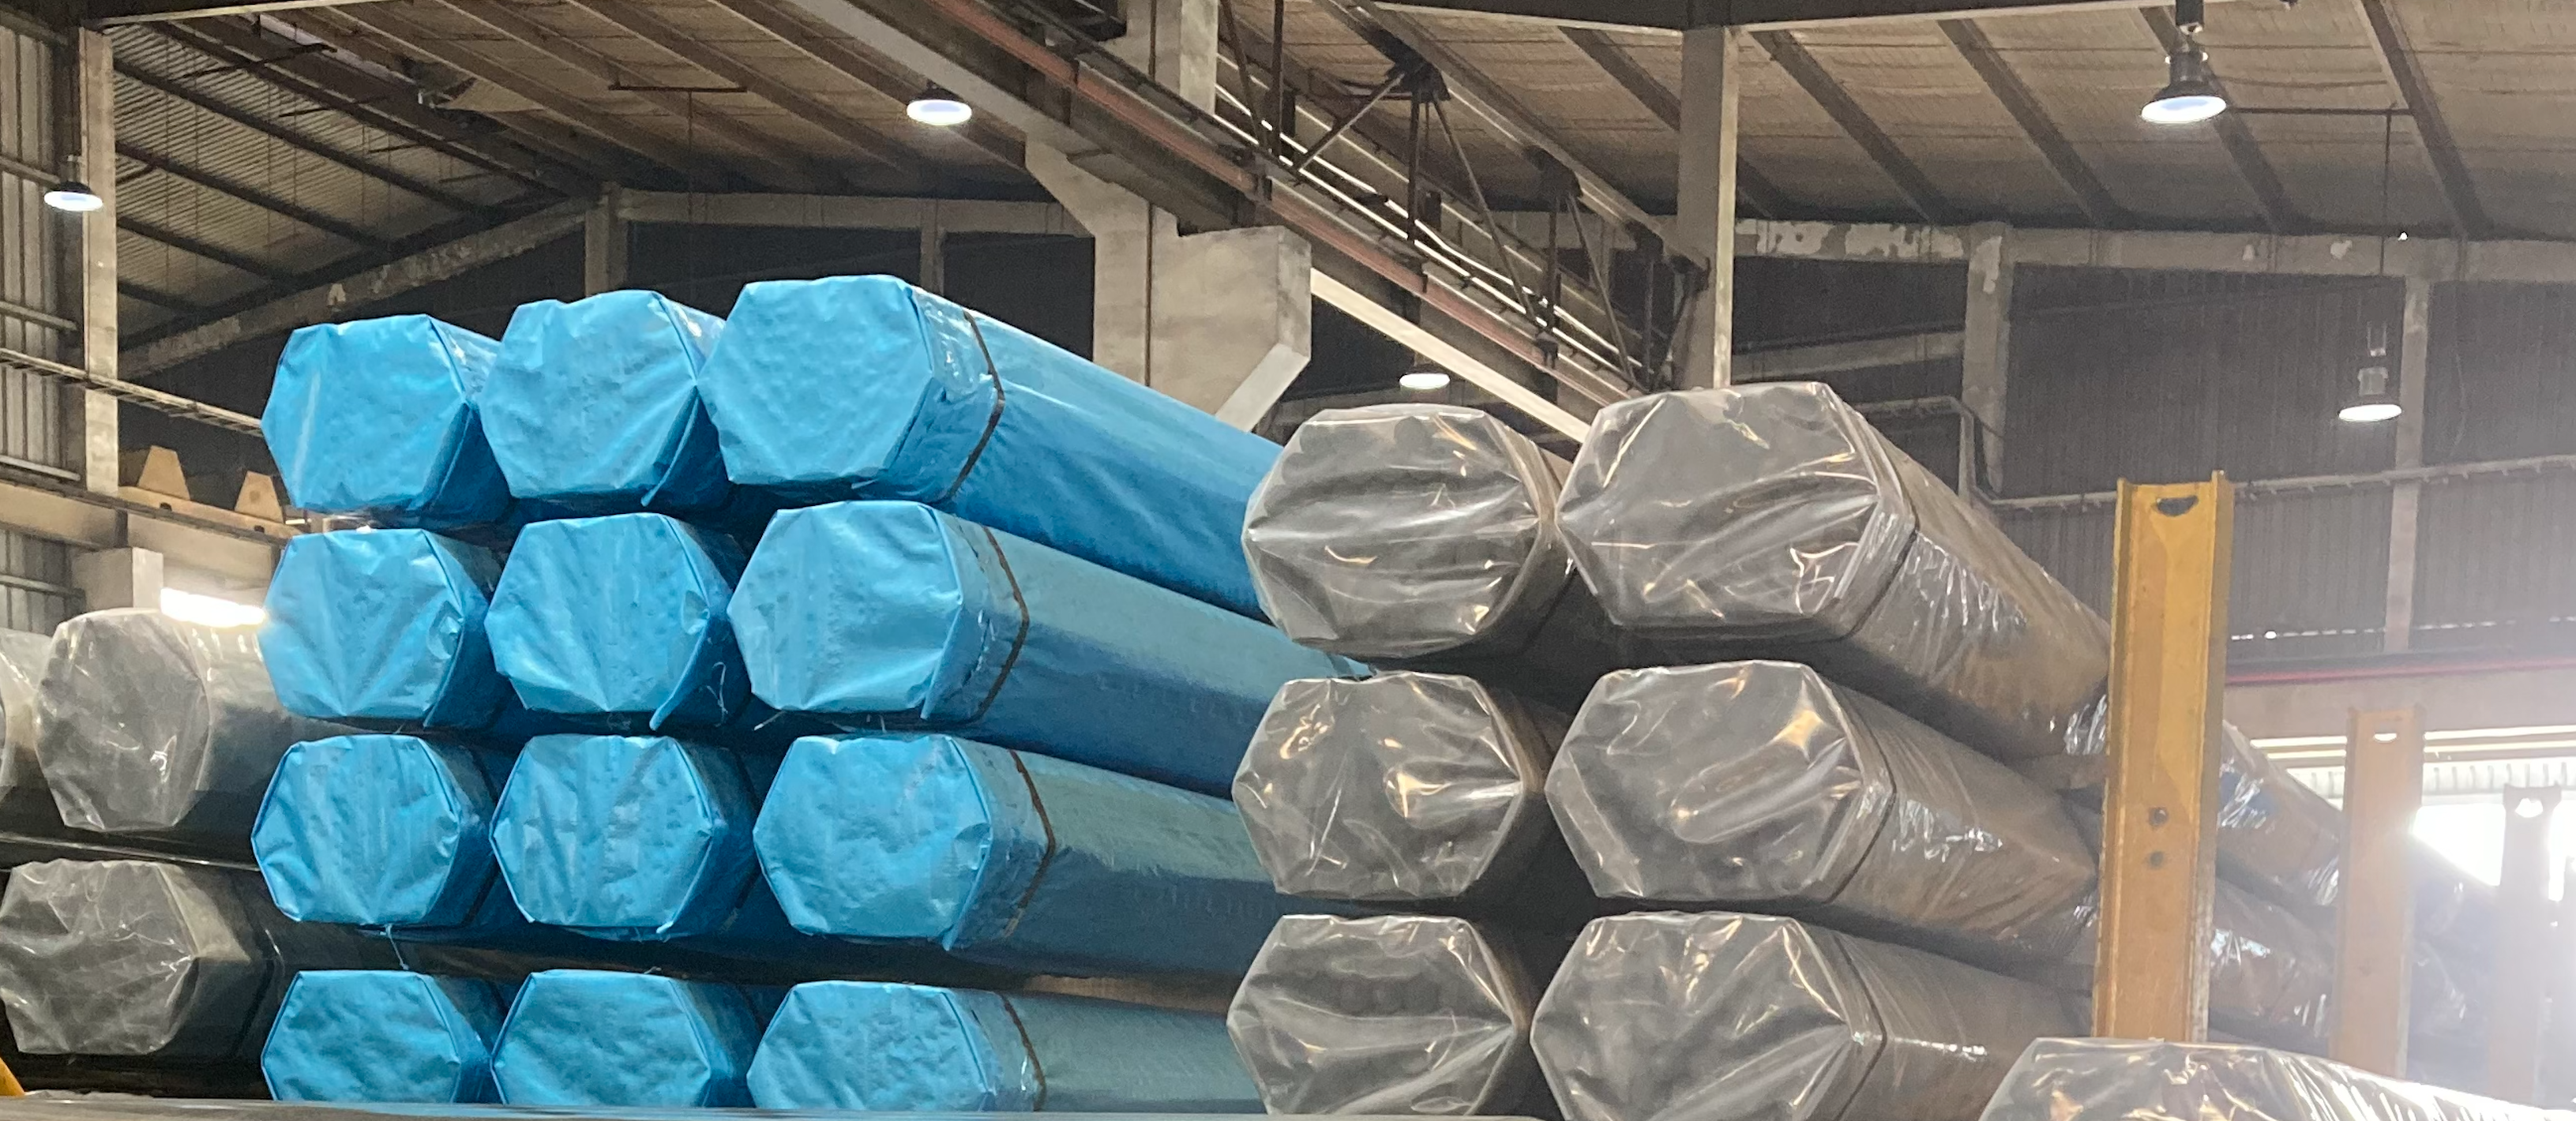 Packing and Stock pipe in Plant